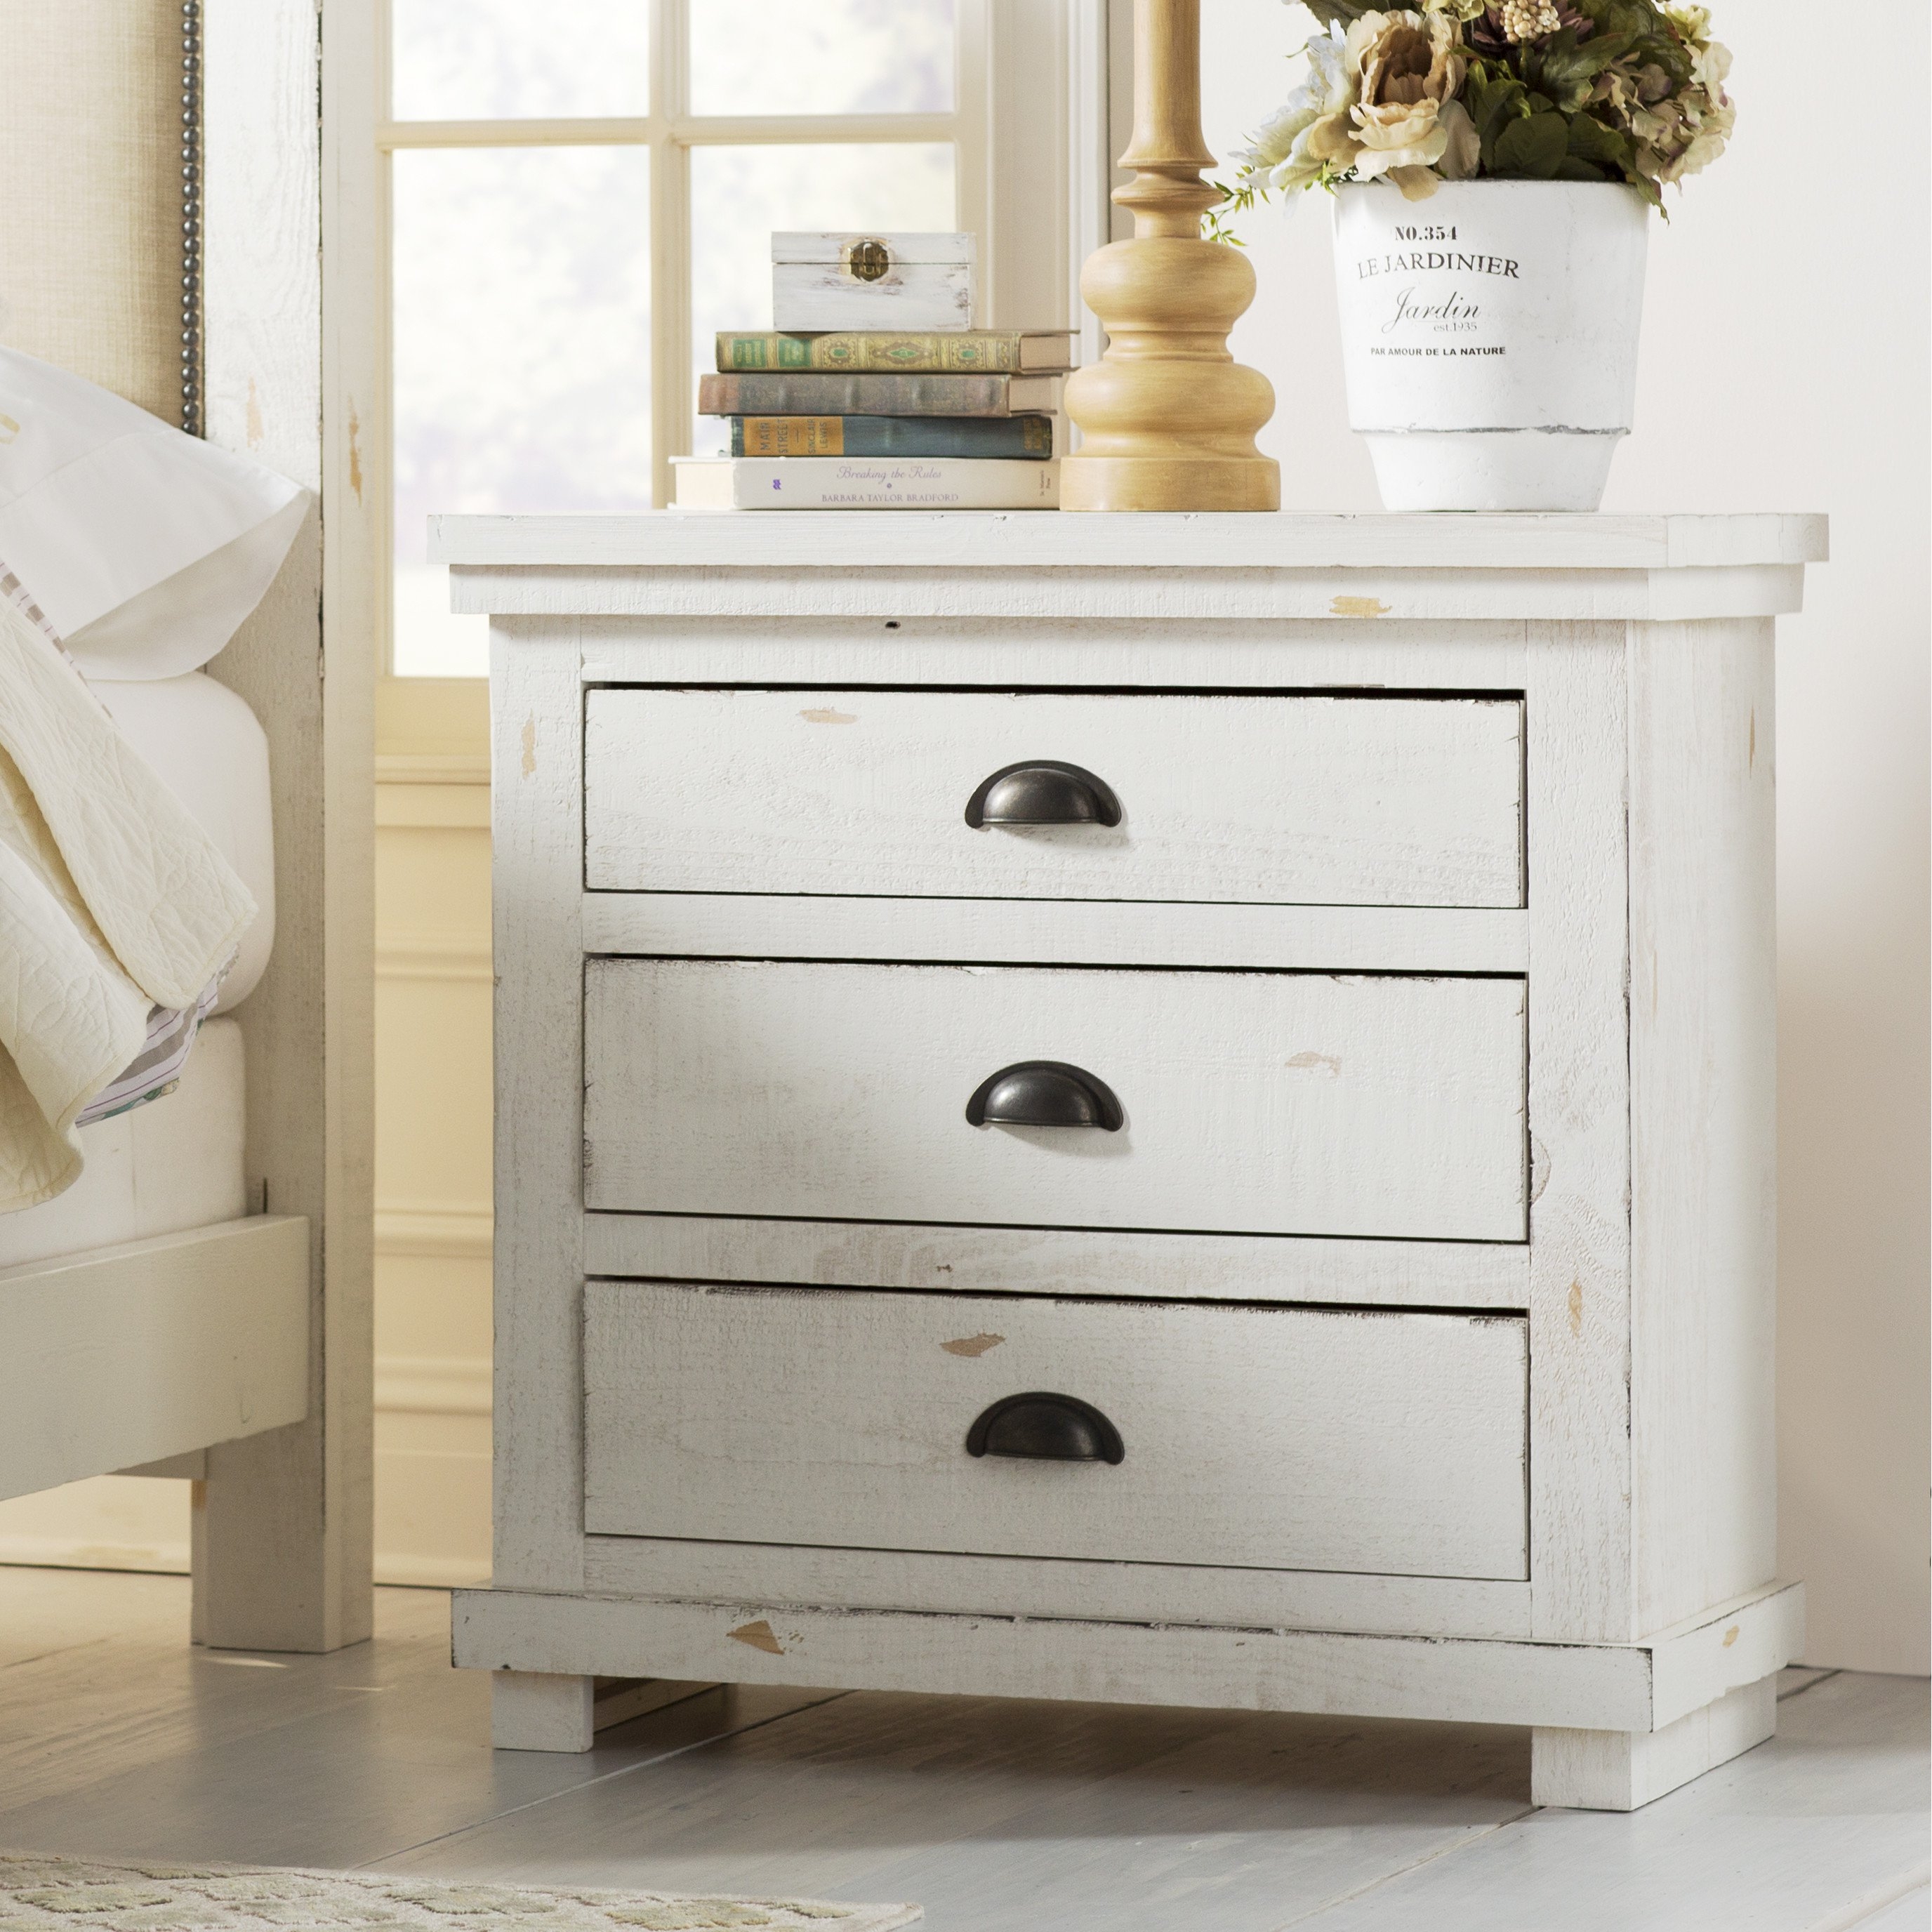 Castagnier 3 Drawer Night Stand by Lark Manor - Distressed White - Image 1